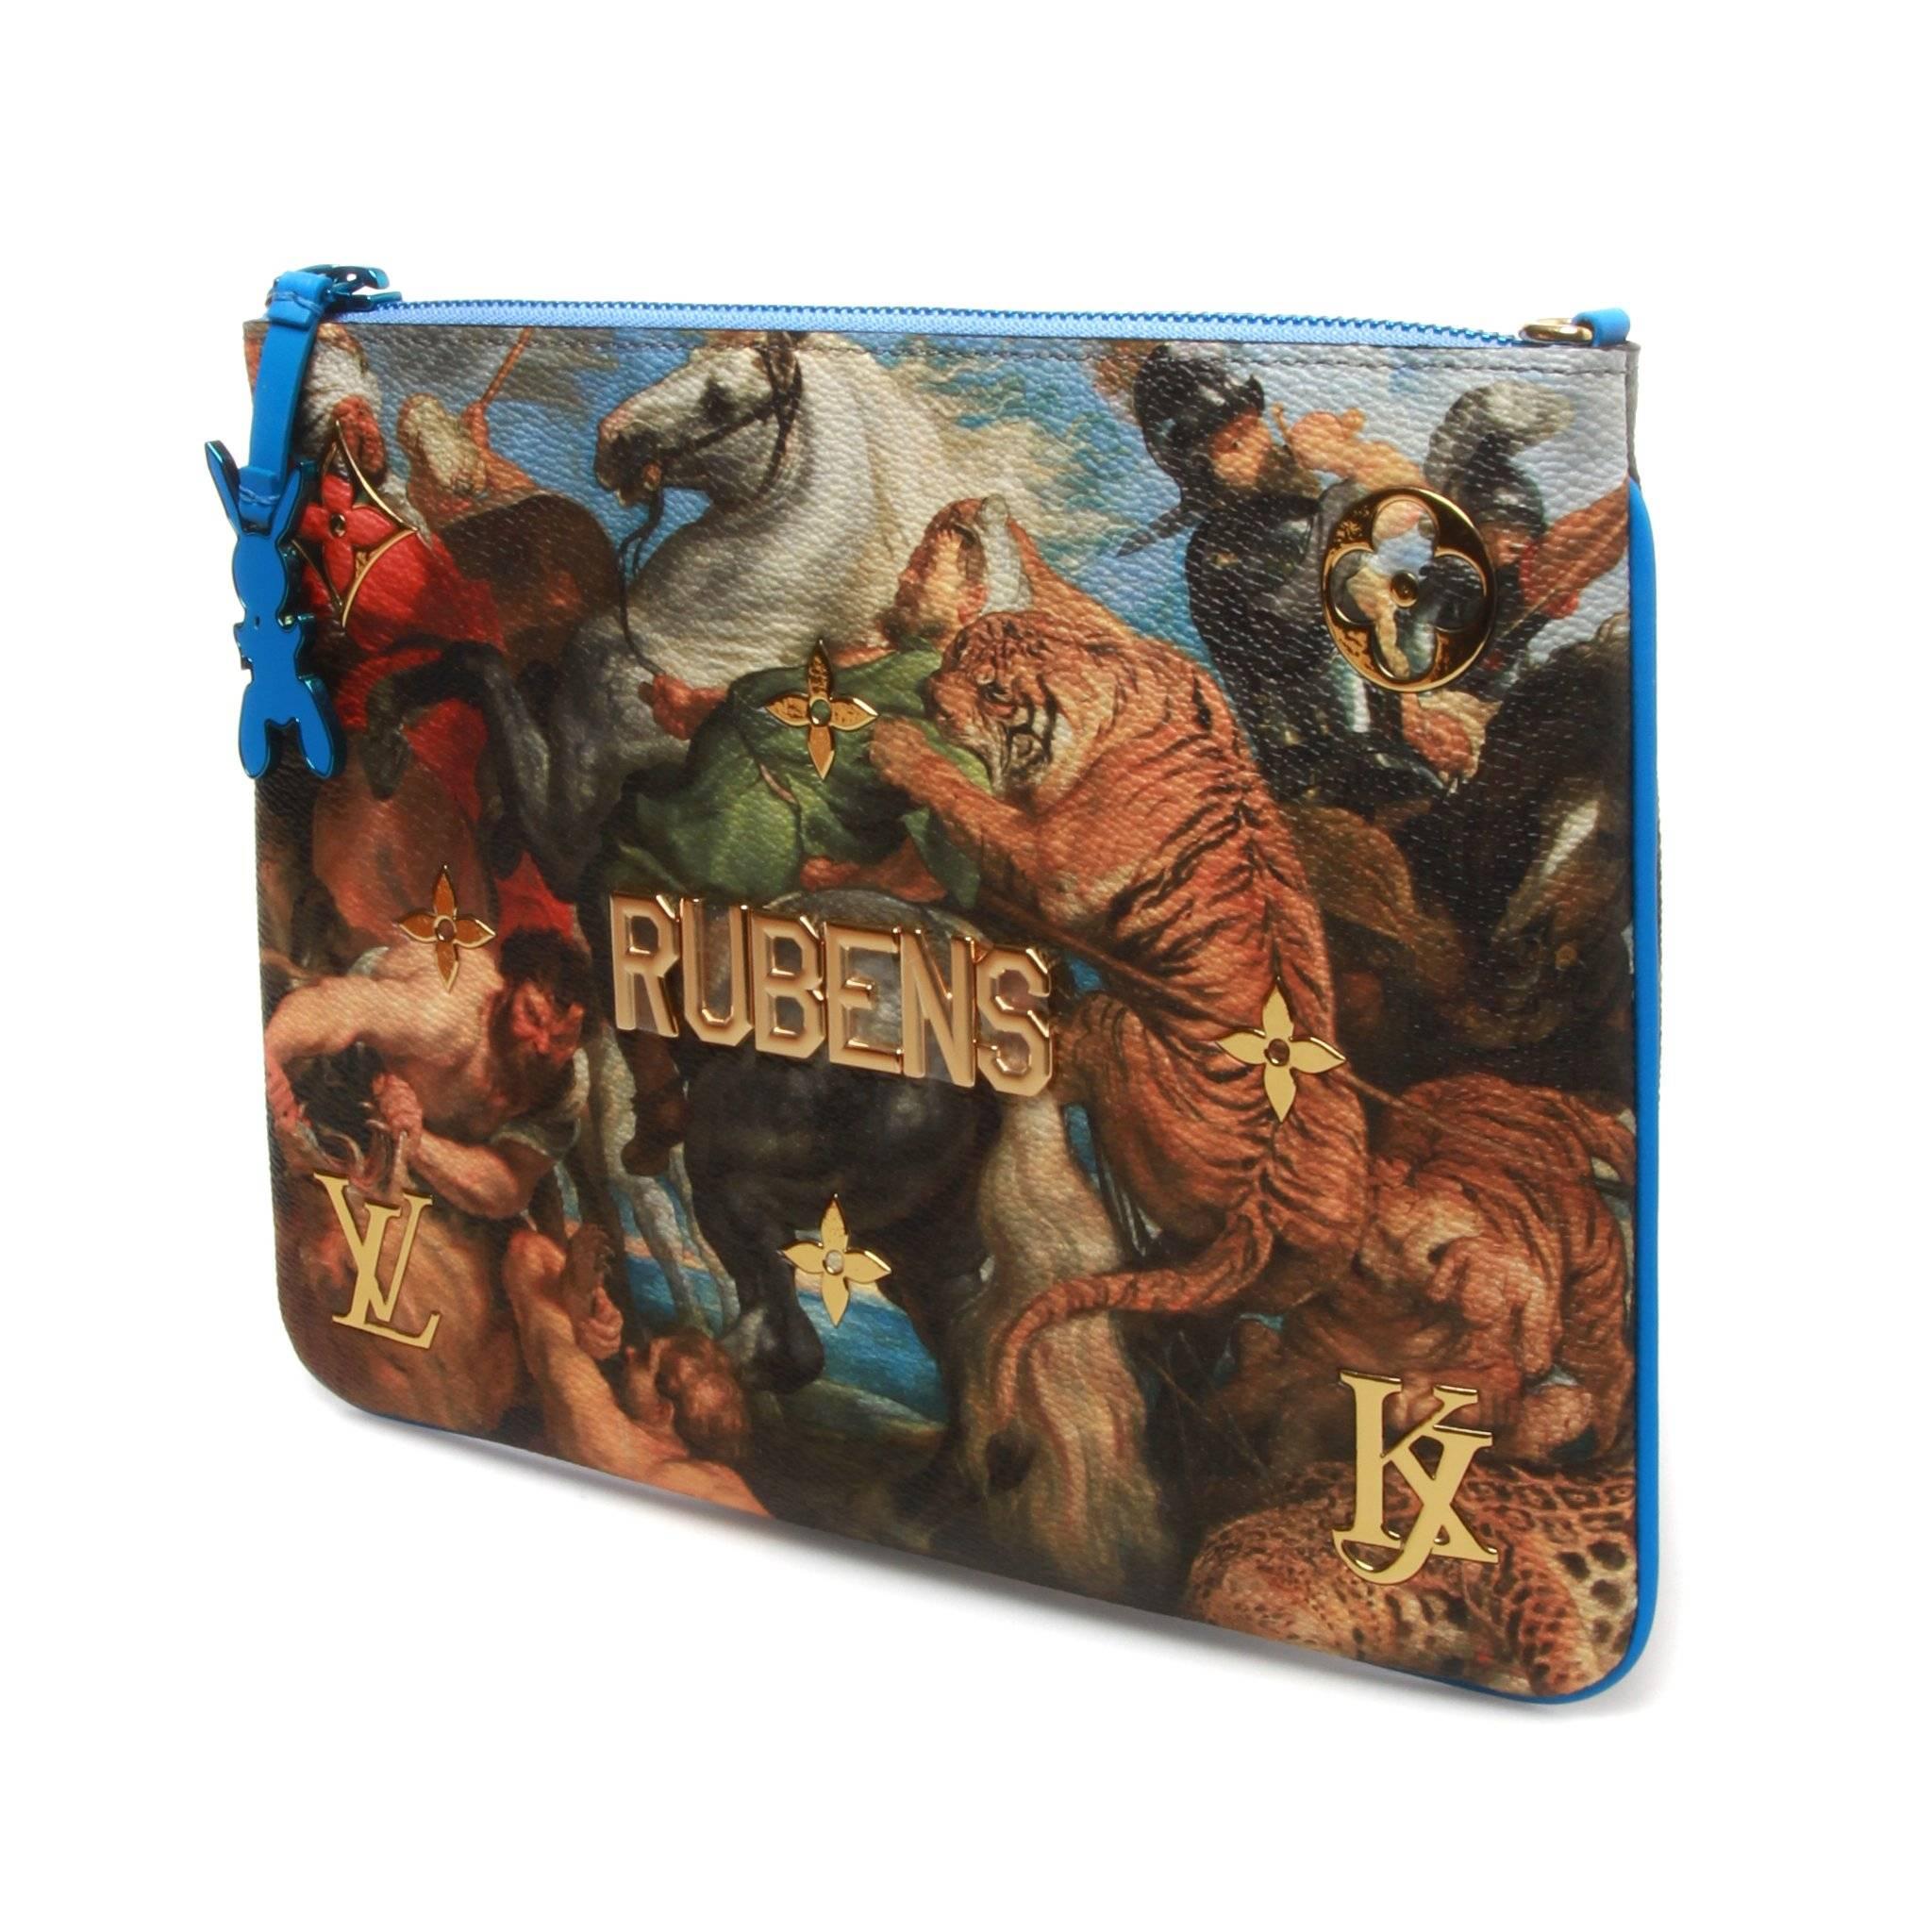 Louis Vuitton flat pouch clutch sporting a classic Rubens masterpiece as part of their Masters series in collaboration with Jeff Koons. 

The flat pouch perfectly wears gold Monogram serti, reflective metallic letters and colored trimmings. A new